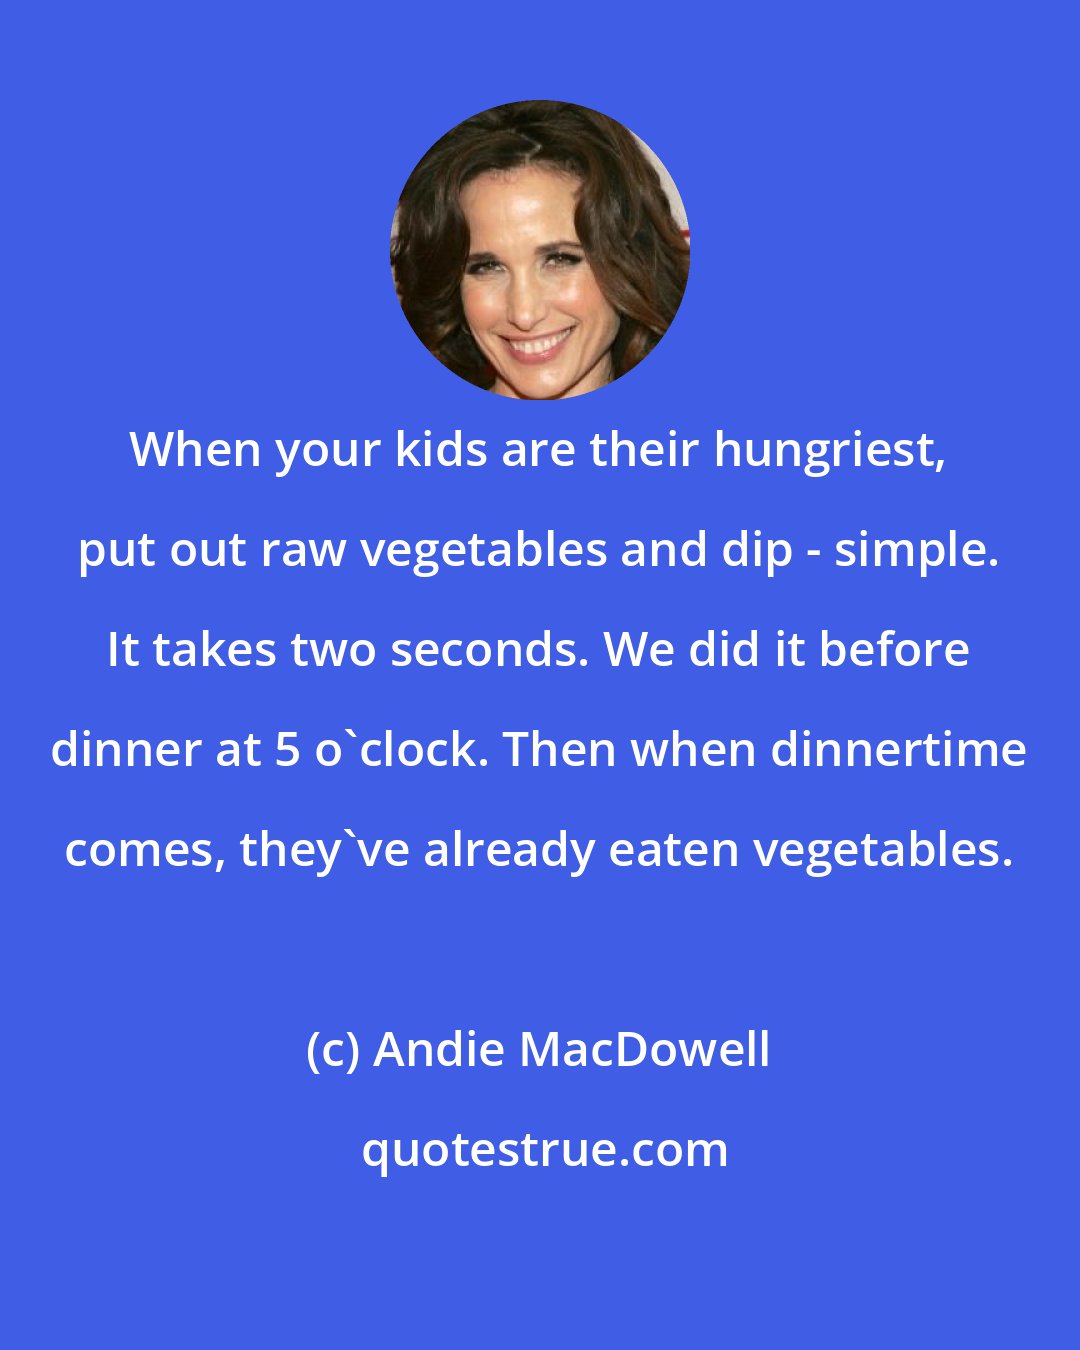 Andie MacDowell: When your kids are their hungriest, put out raw vegetables and dip - simple. It takes two seconds. We did it before dinner at 5 o'clock. Then when dinnertime comes, they've already eaten vegetables.